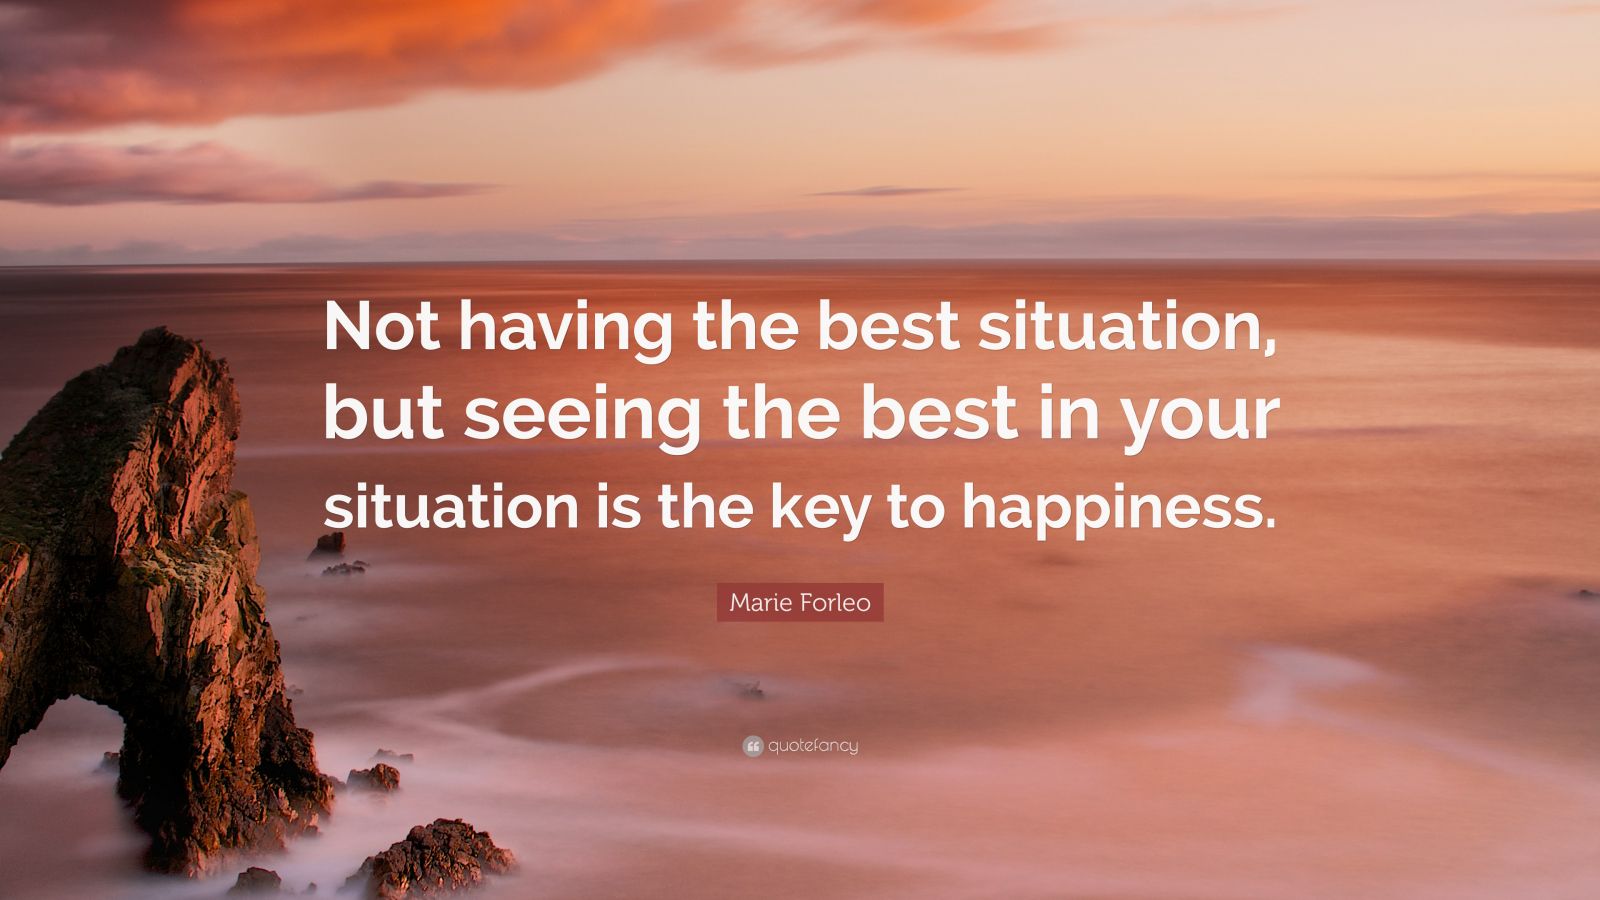 Marie Forleo Quote: “Not having the best situation, but seeing the best ...